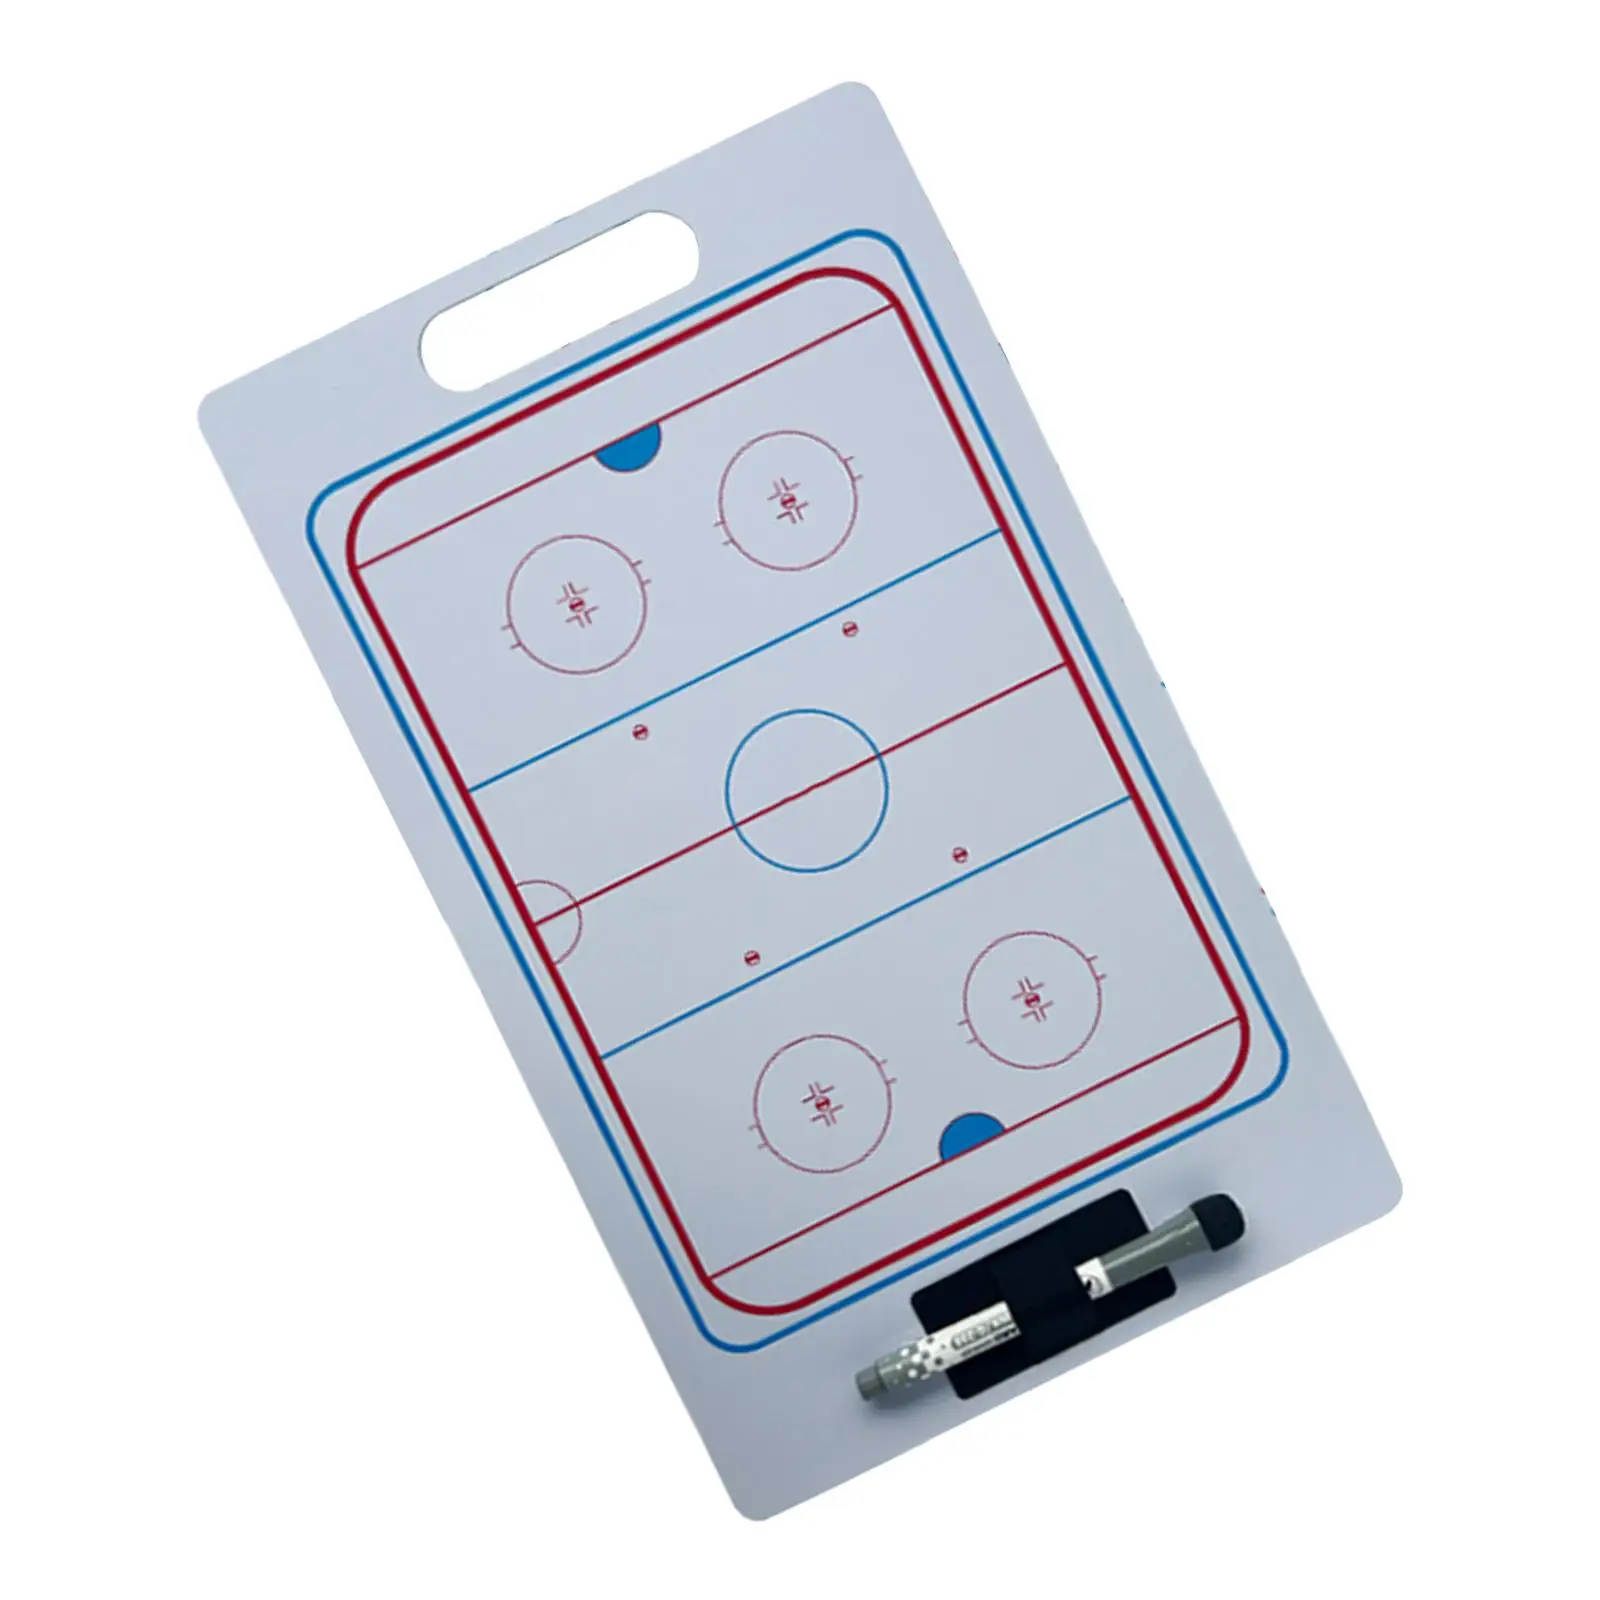 Ice Hockey Tactic Coaching Boards Training Aid Soccer Coaches Practice Board Training Equipment Strategy Tactic Clipboard